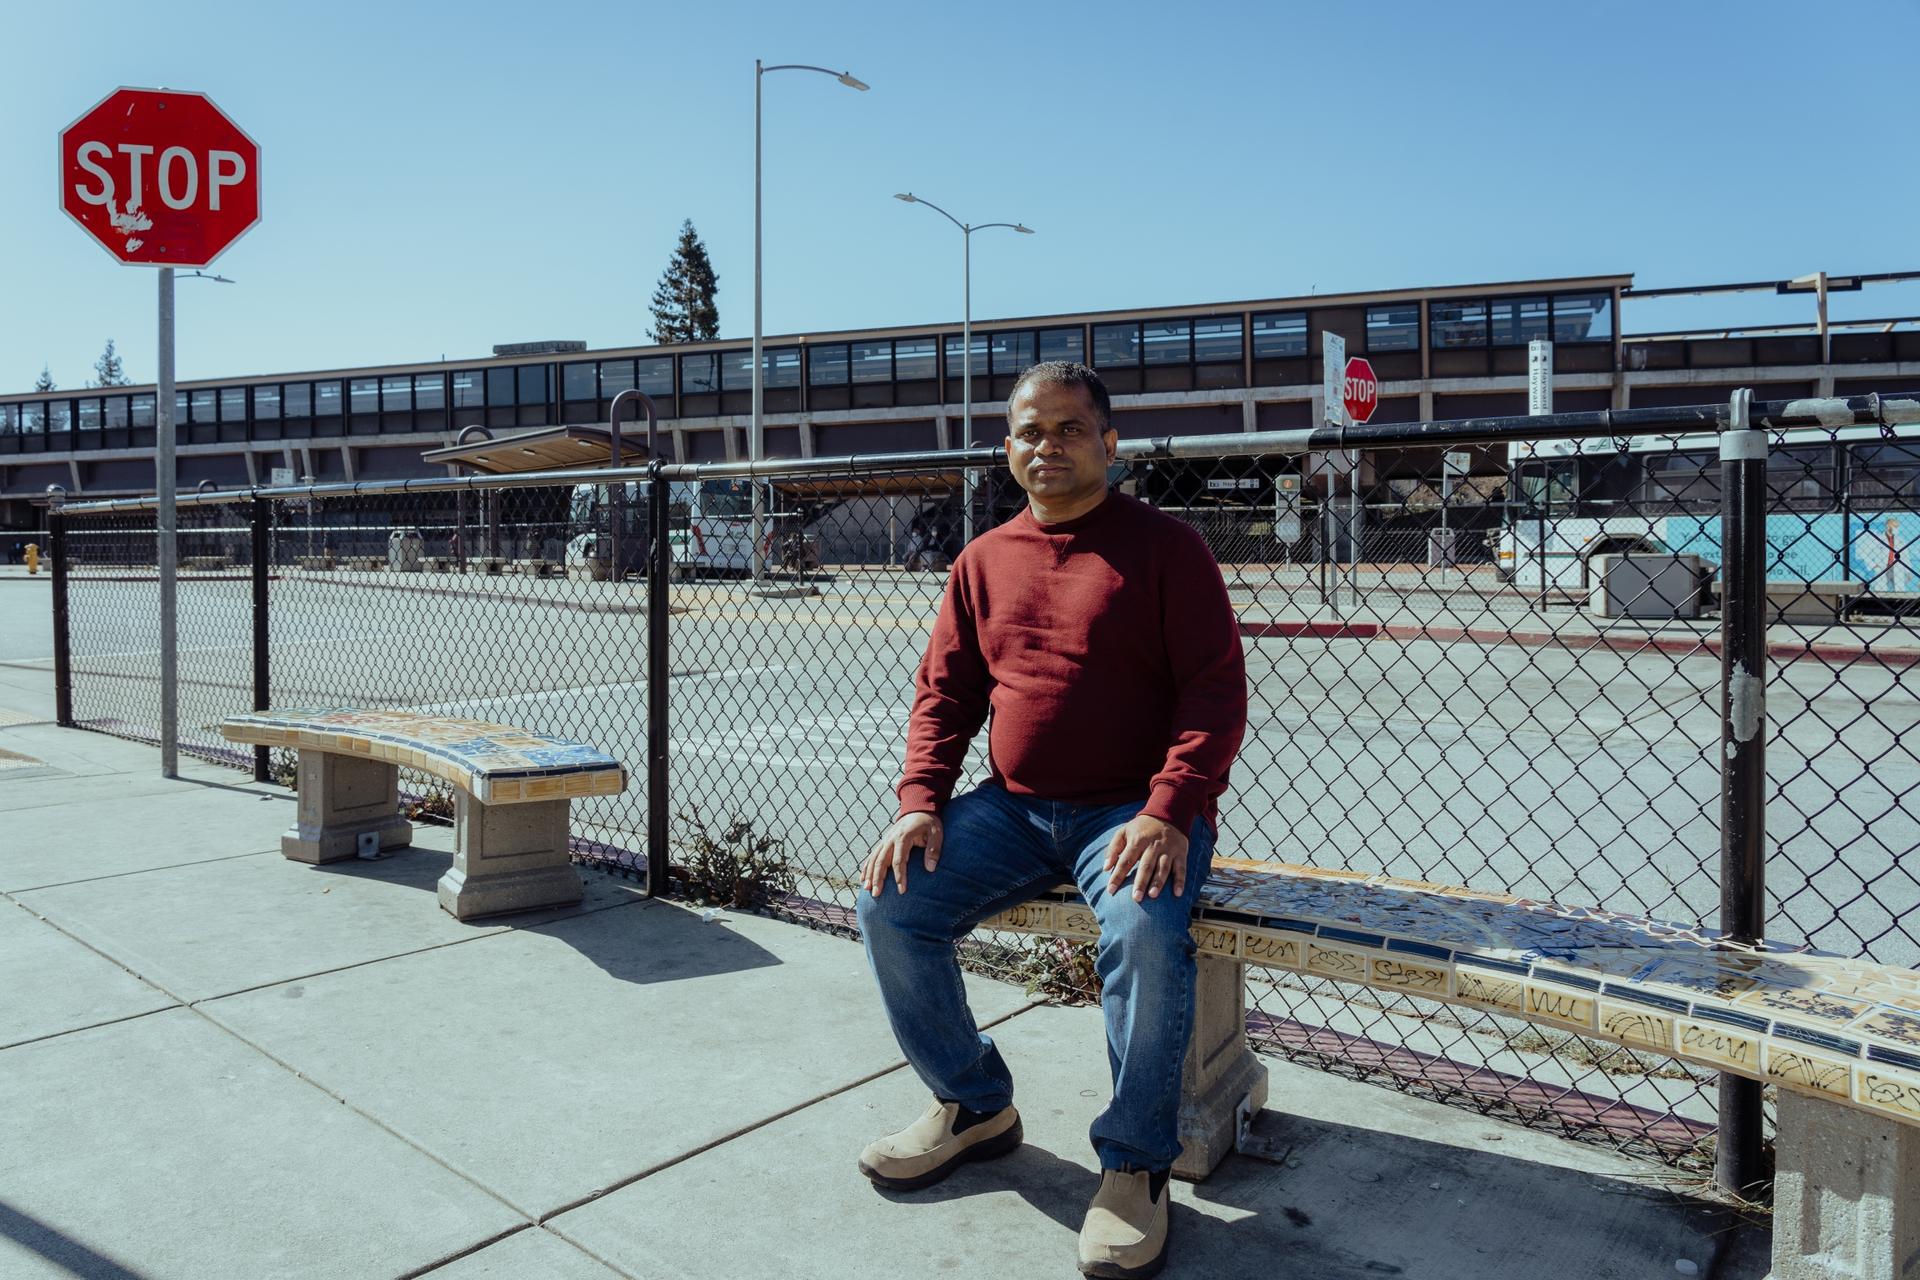 man on a bench at a train station 